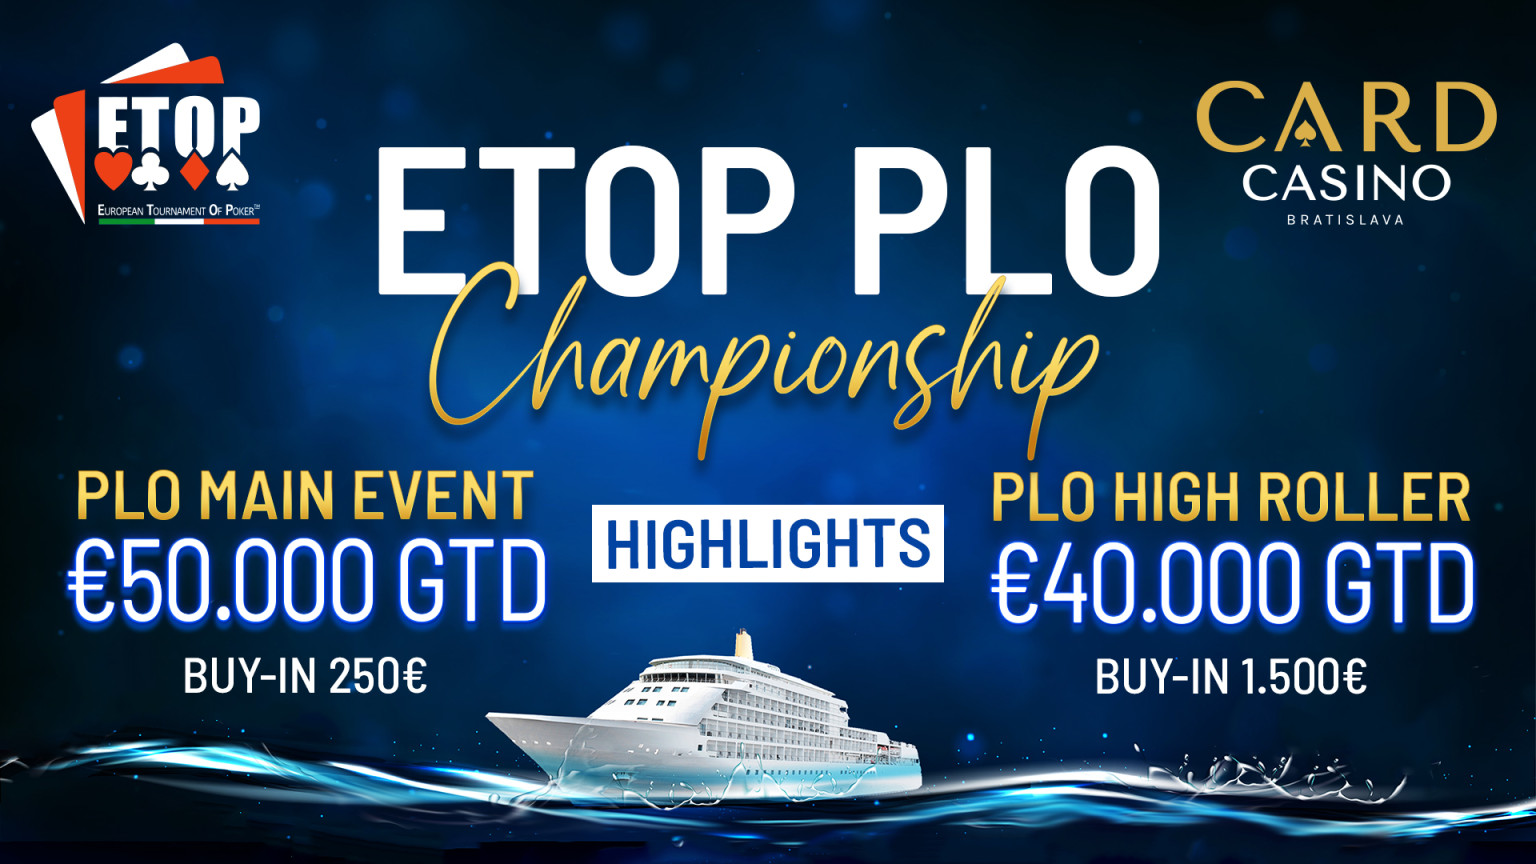 ETOP €100,000 GTD launches. You can look forward to the Main Event and High Roller